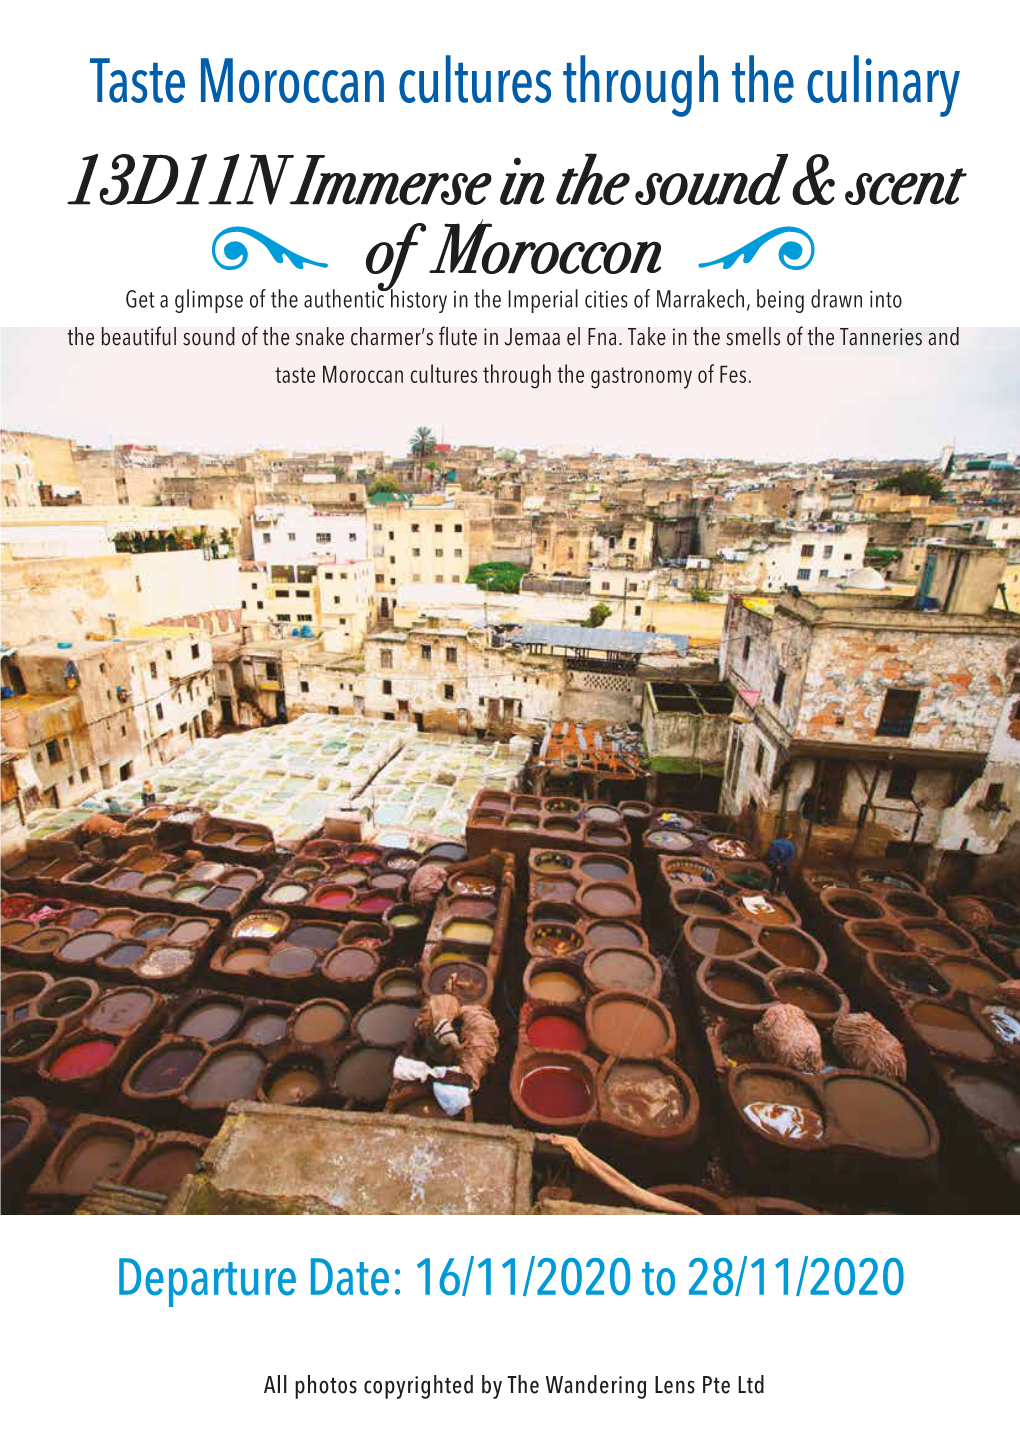 13D11N Immerse in the Sound & Scent of Moroccon